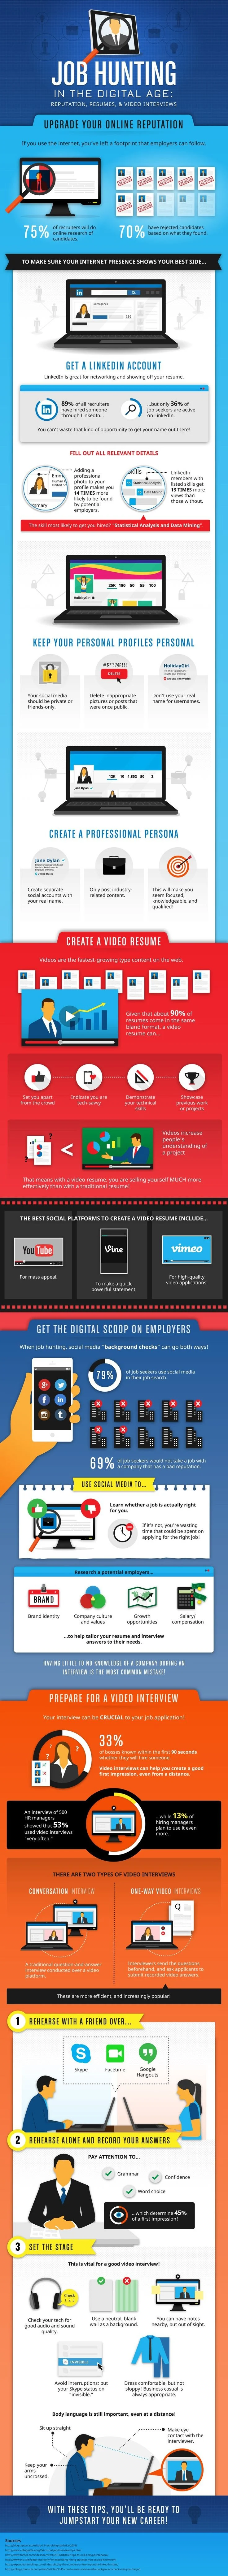 Job Hunting in the Digital Age - #infographic